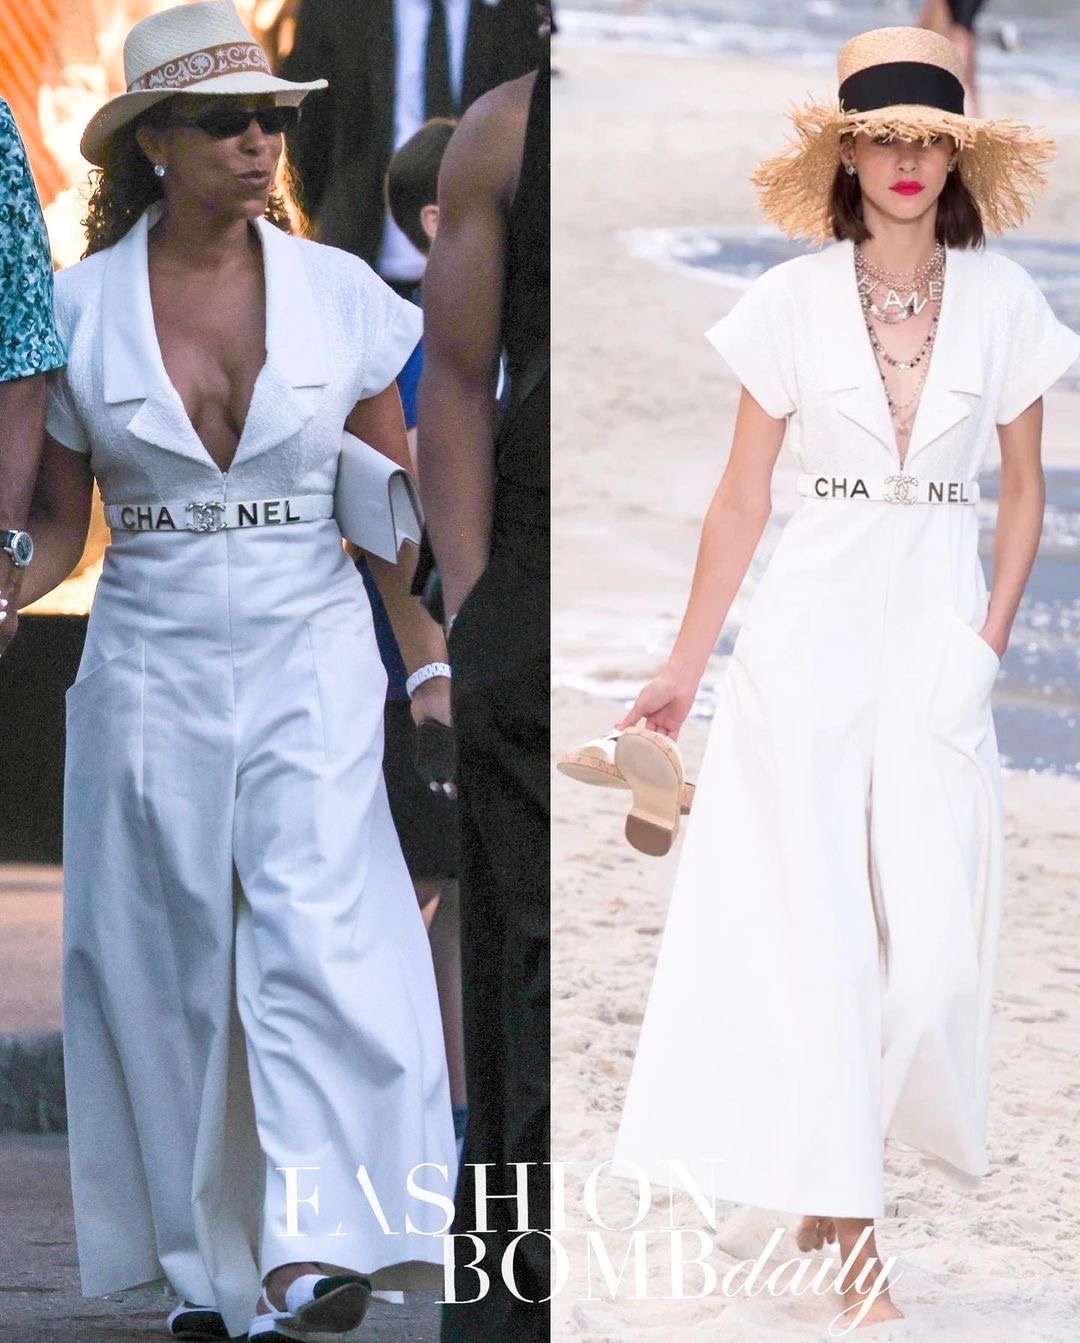 Fashion Bomb Couple: Steve Harvey Wore a $1700 Louis Vuitton Monogram Shirt  with Wife Marjorie Who Opted for a White Chanel Jumpsuit While Vacationing  in St. Tropez – Fashion Bomb Daily